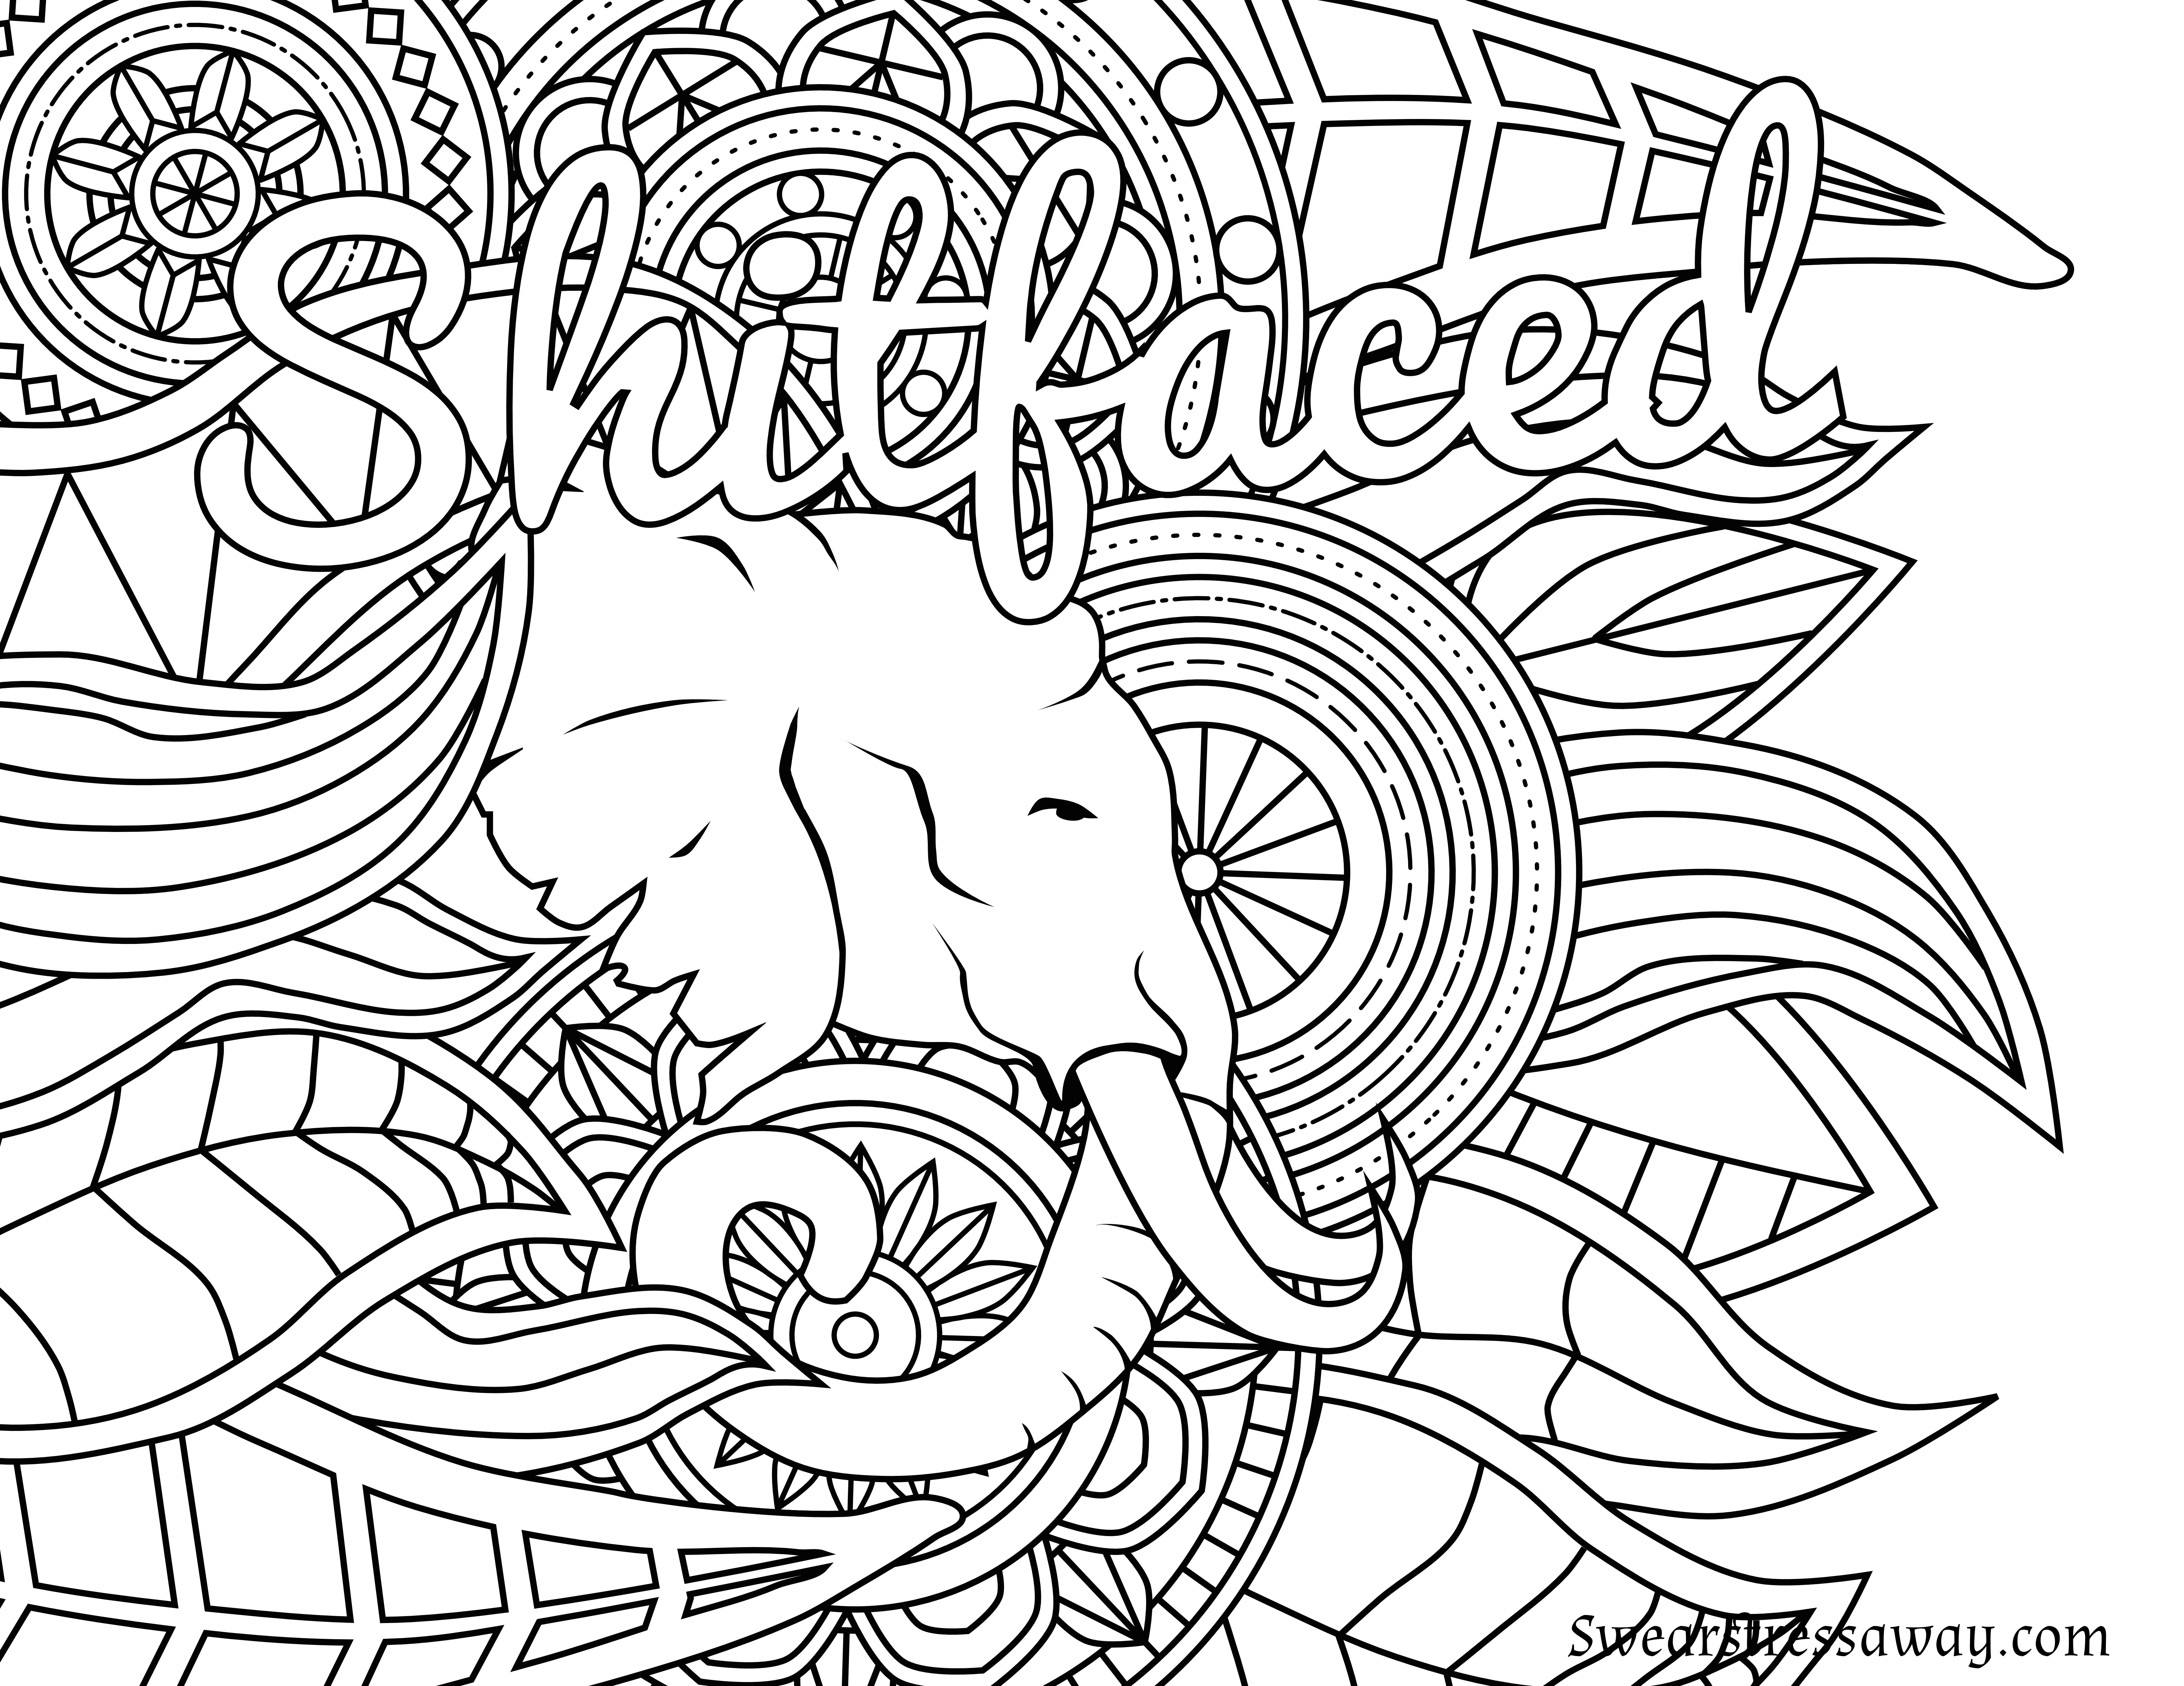 Adult Coloring Books Bad Words
 Free Printable Coloring Page Shitfaced Swear Word